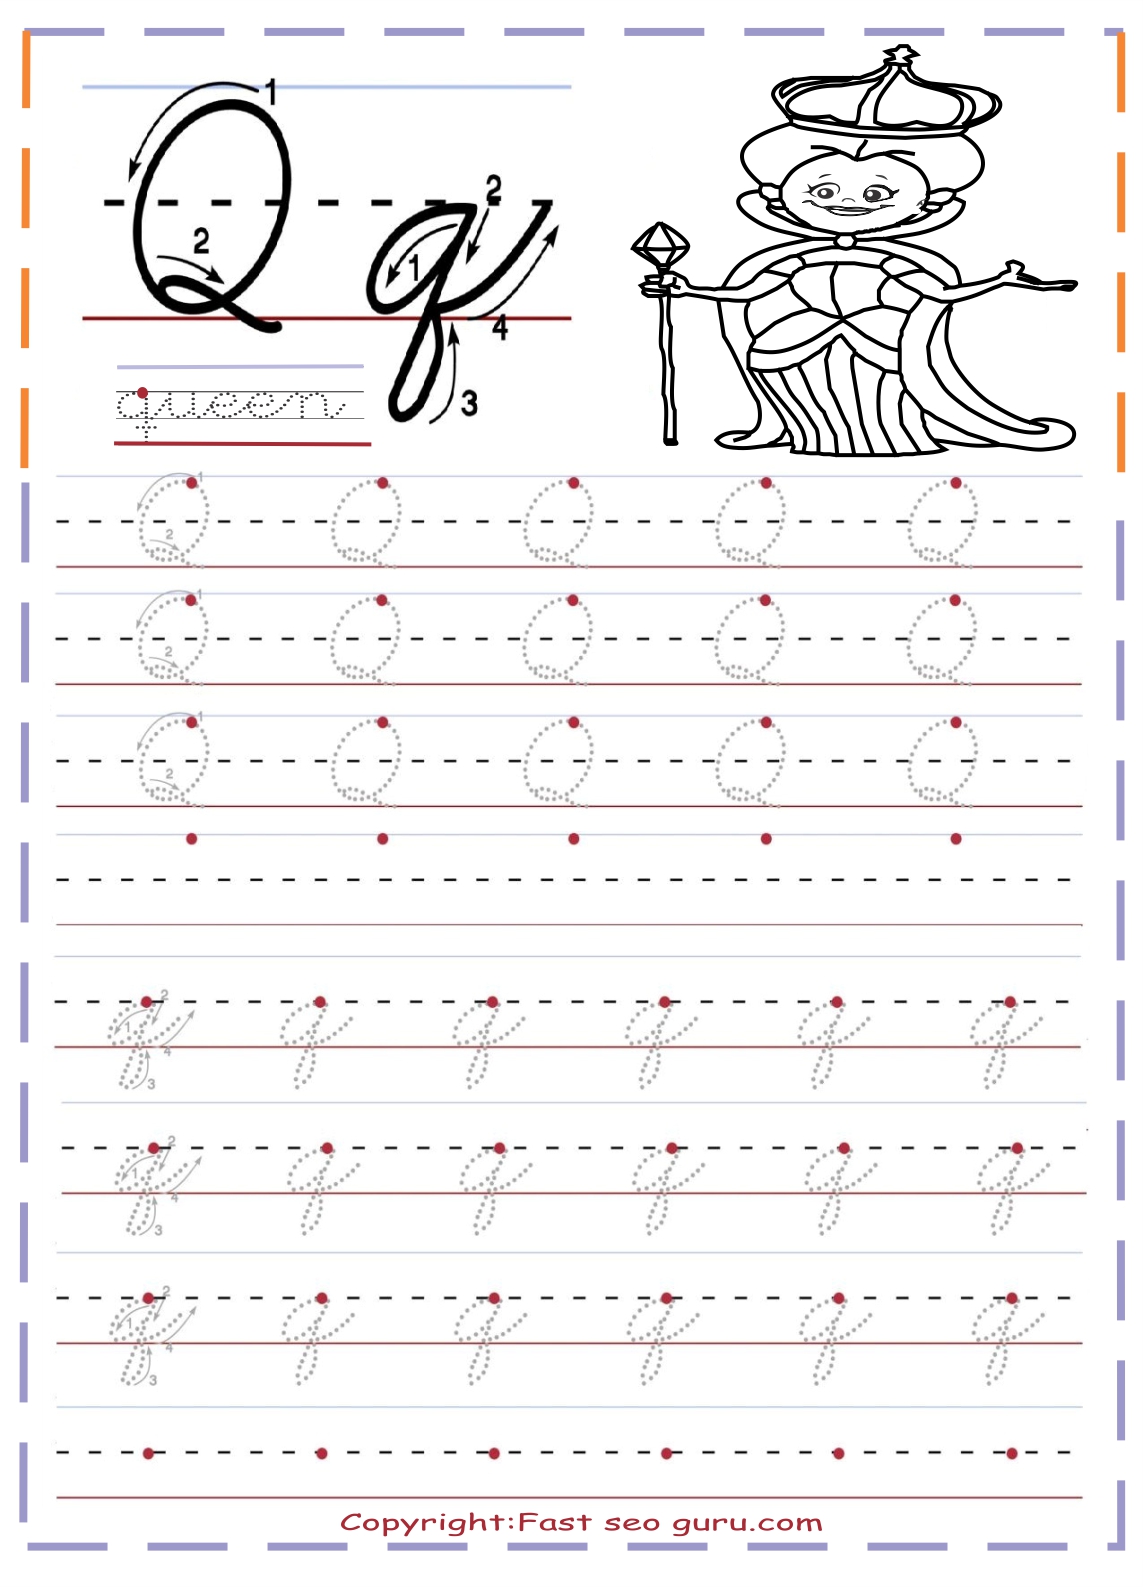 cursive handwriting tracing worksheets letter q for queen